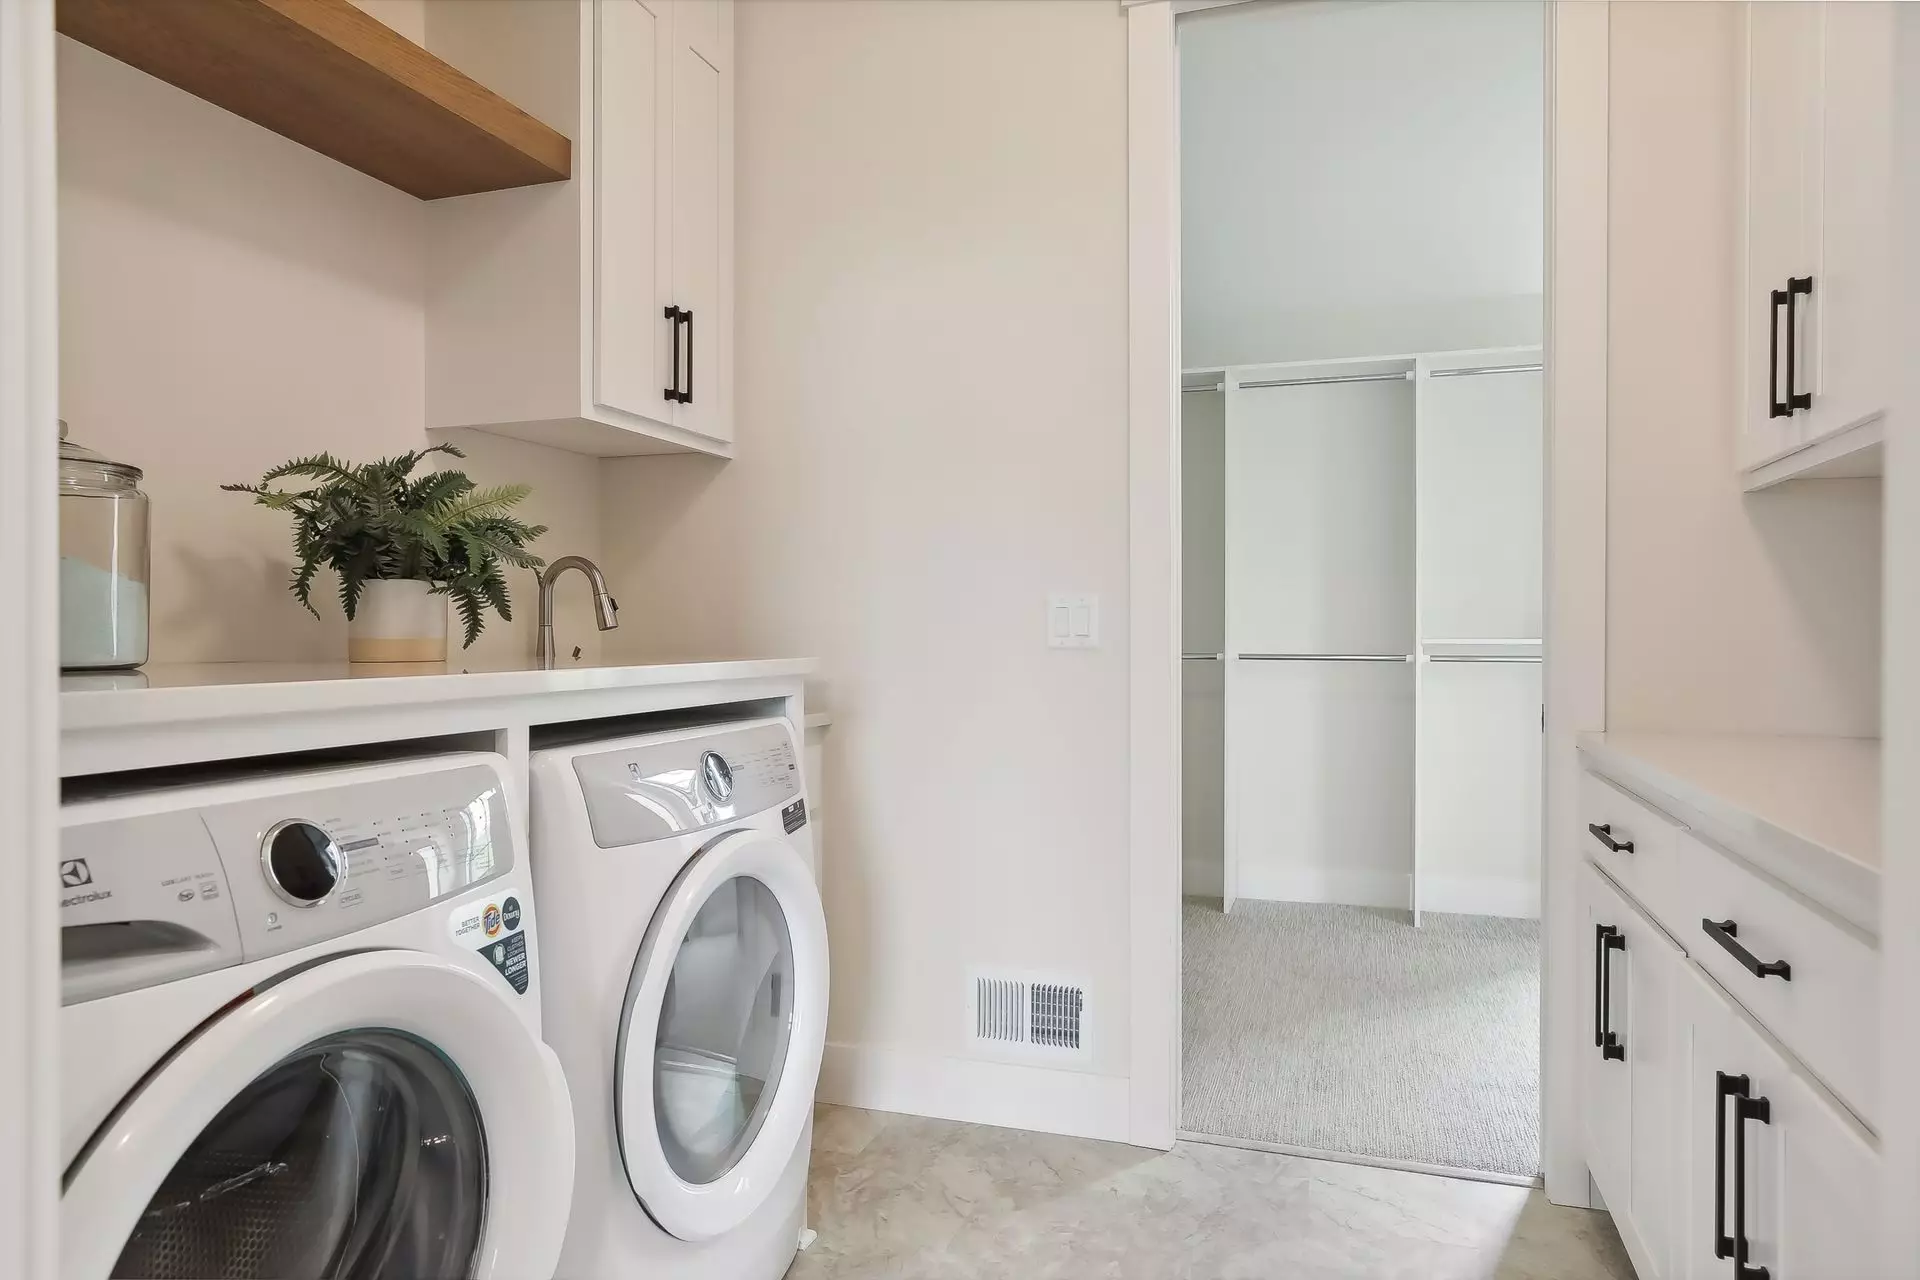 Laundry room with under counter washer dryer and direct access to owner’s suite closet